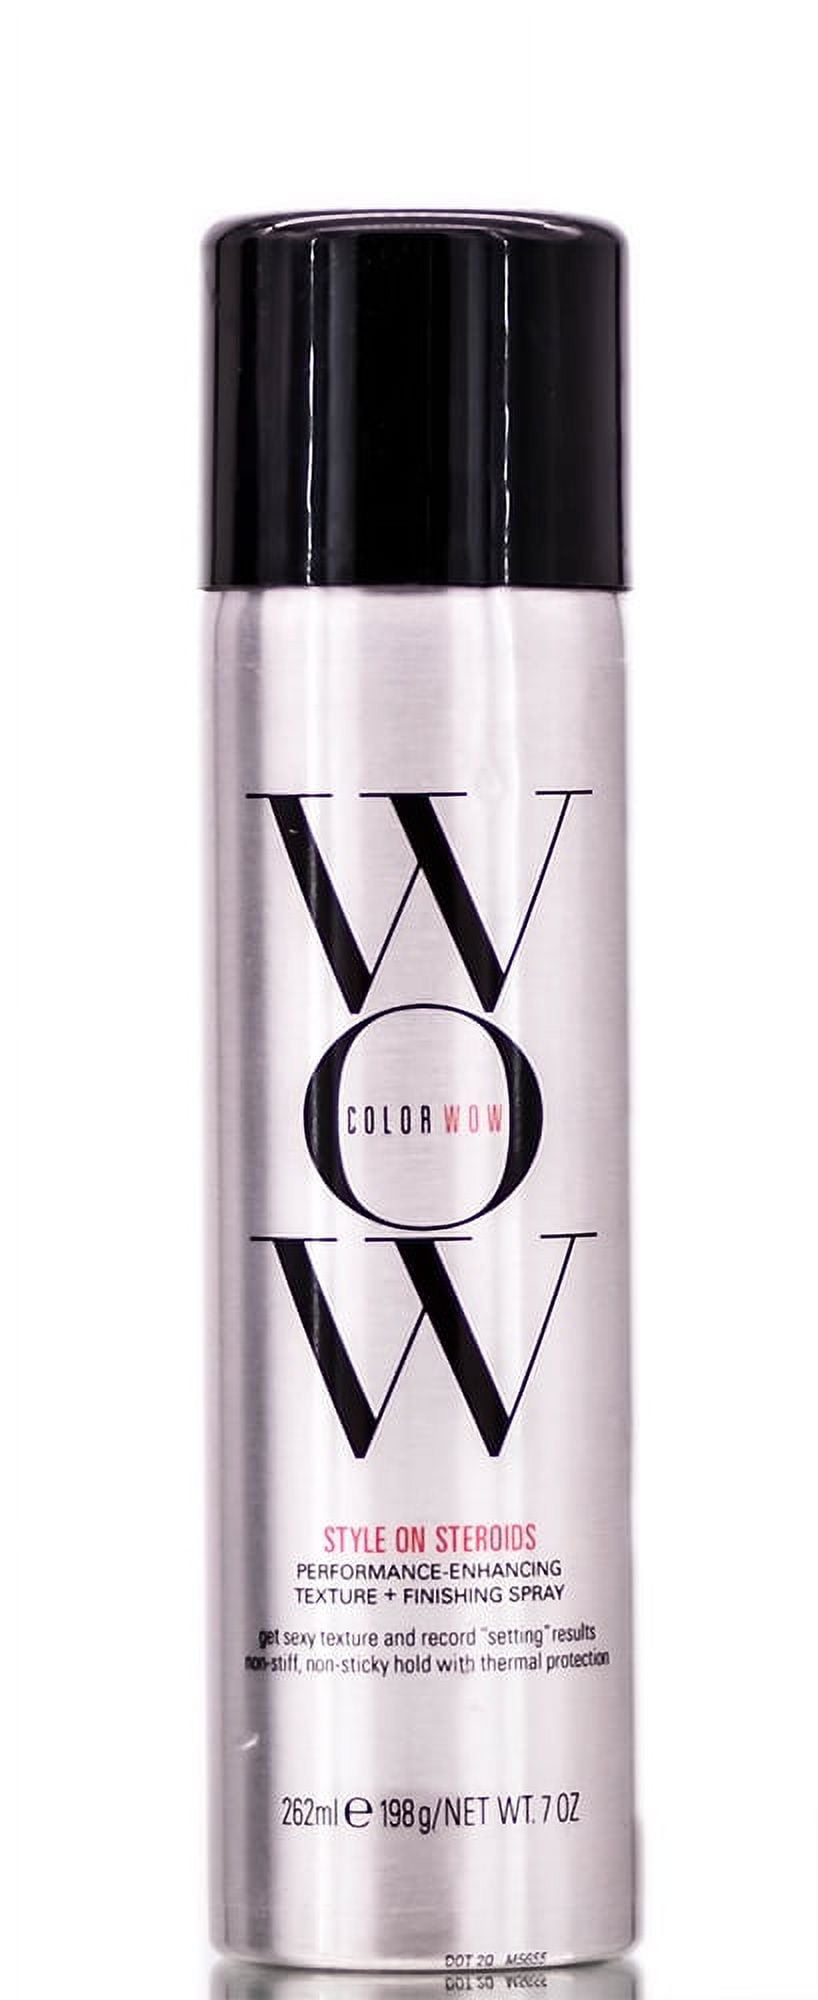 Dropship COLOR WOW By Color Wow STYLE ON STEROIDS TEXTURIZING SPRAY 1.5 OZ  to Sell Online at a Lower Price